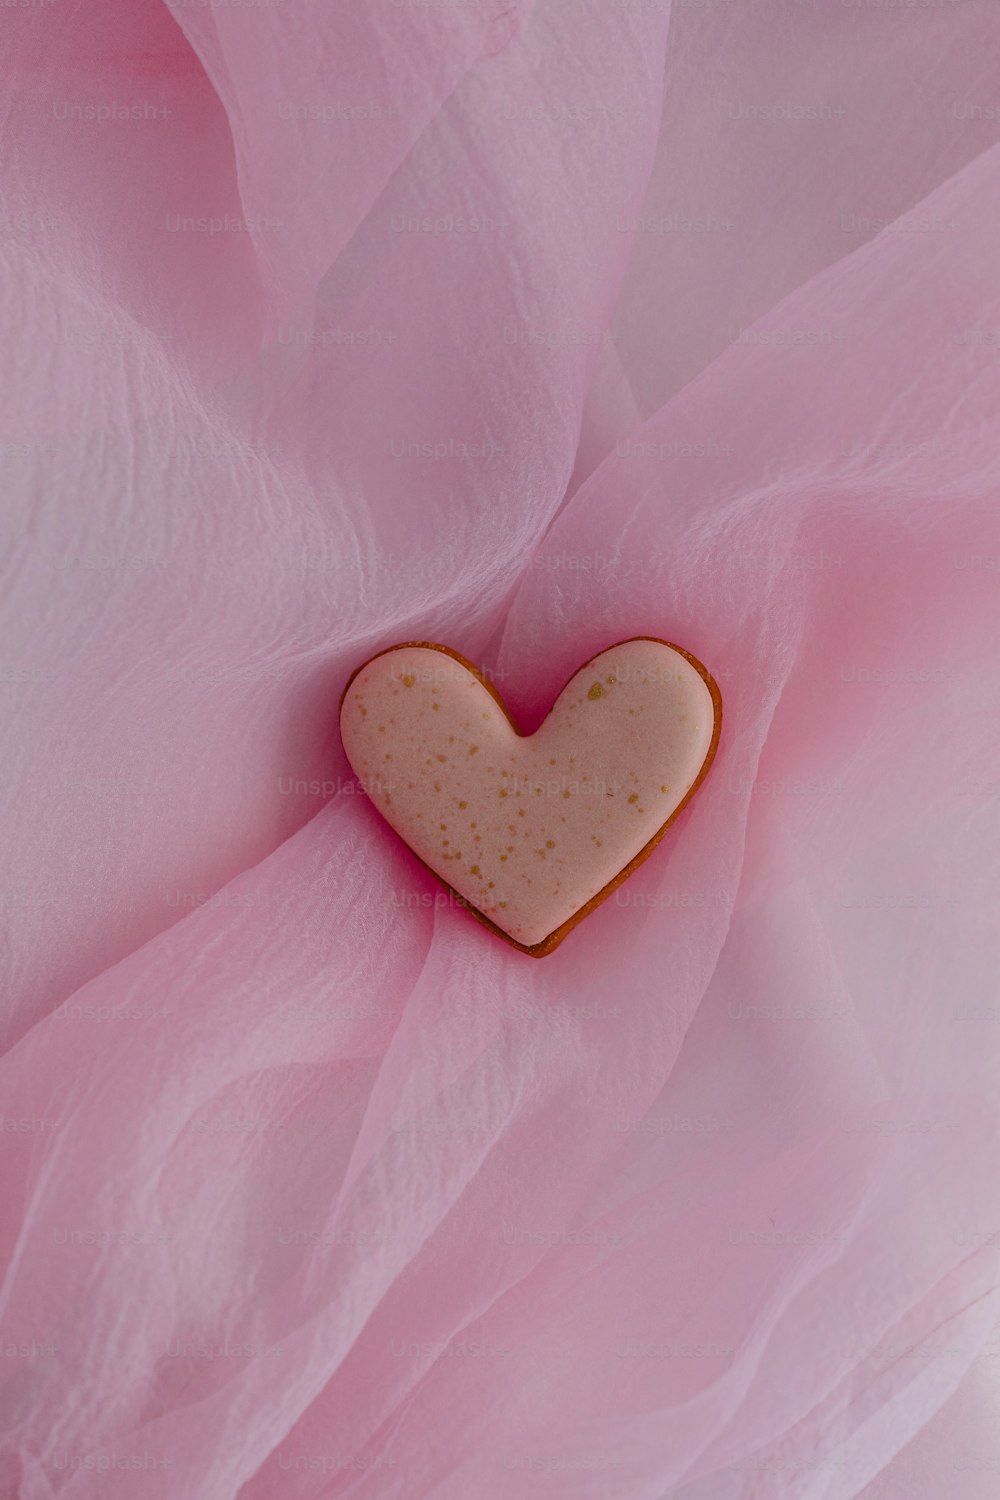 a heart shaped cookie sitting on top of a pink cloth